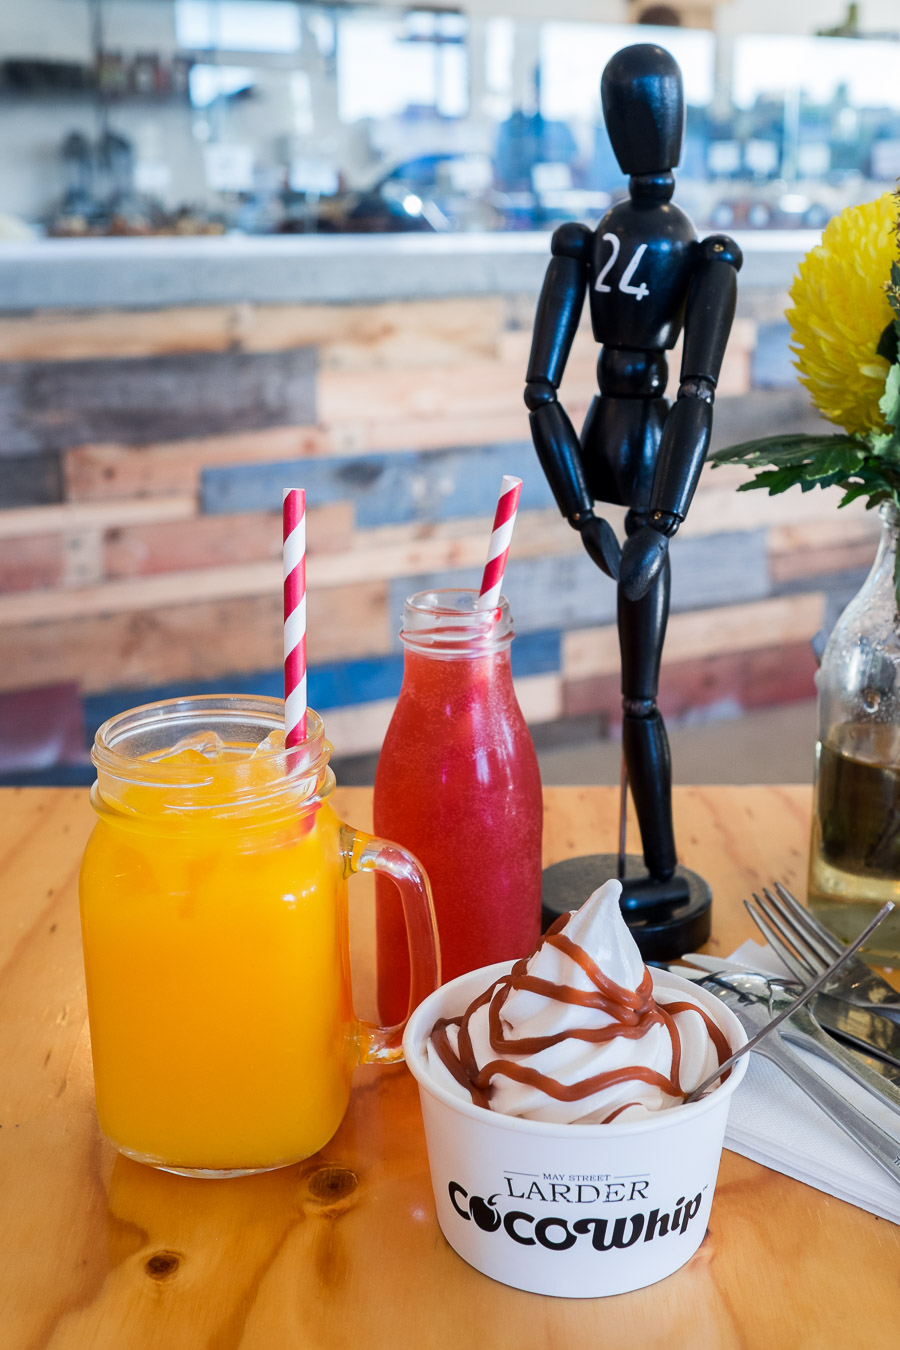 Raspberry, vanilla and lime housemade soda (AU$4), fresh organic orange juice (AU$7.50) and CocoWhip Original (AU$7) with salted caramel topping (AU$1). Stripey paper straws have twee appeal but are as impractical as they are photogenic - this one didn't last the entire jar of orange juice: liquid plus paper equals pulp.